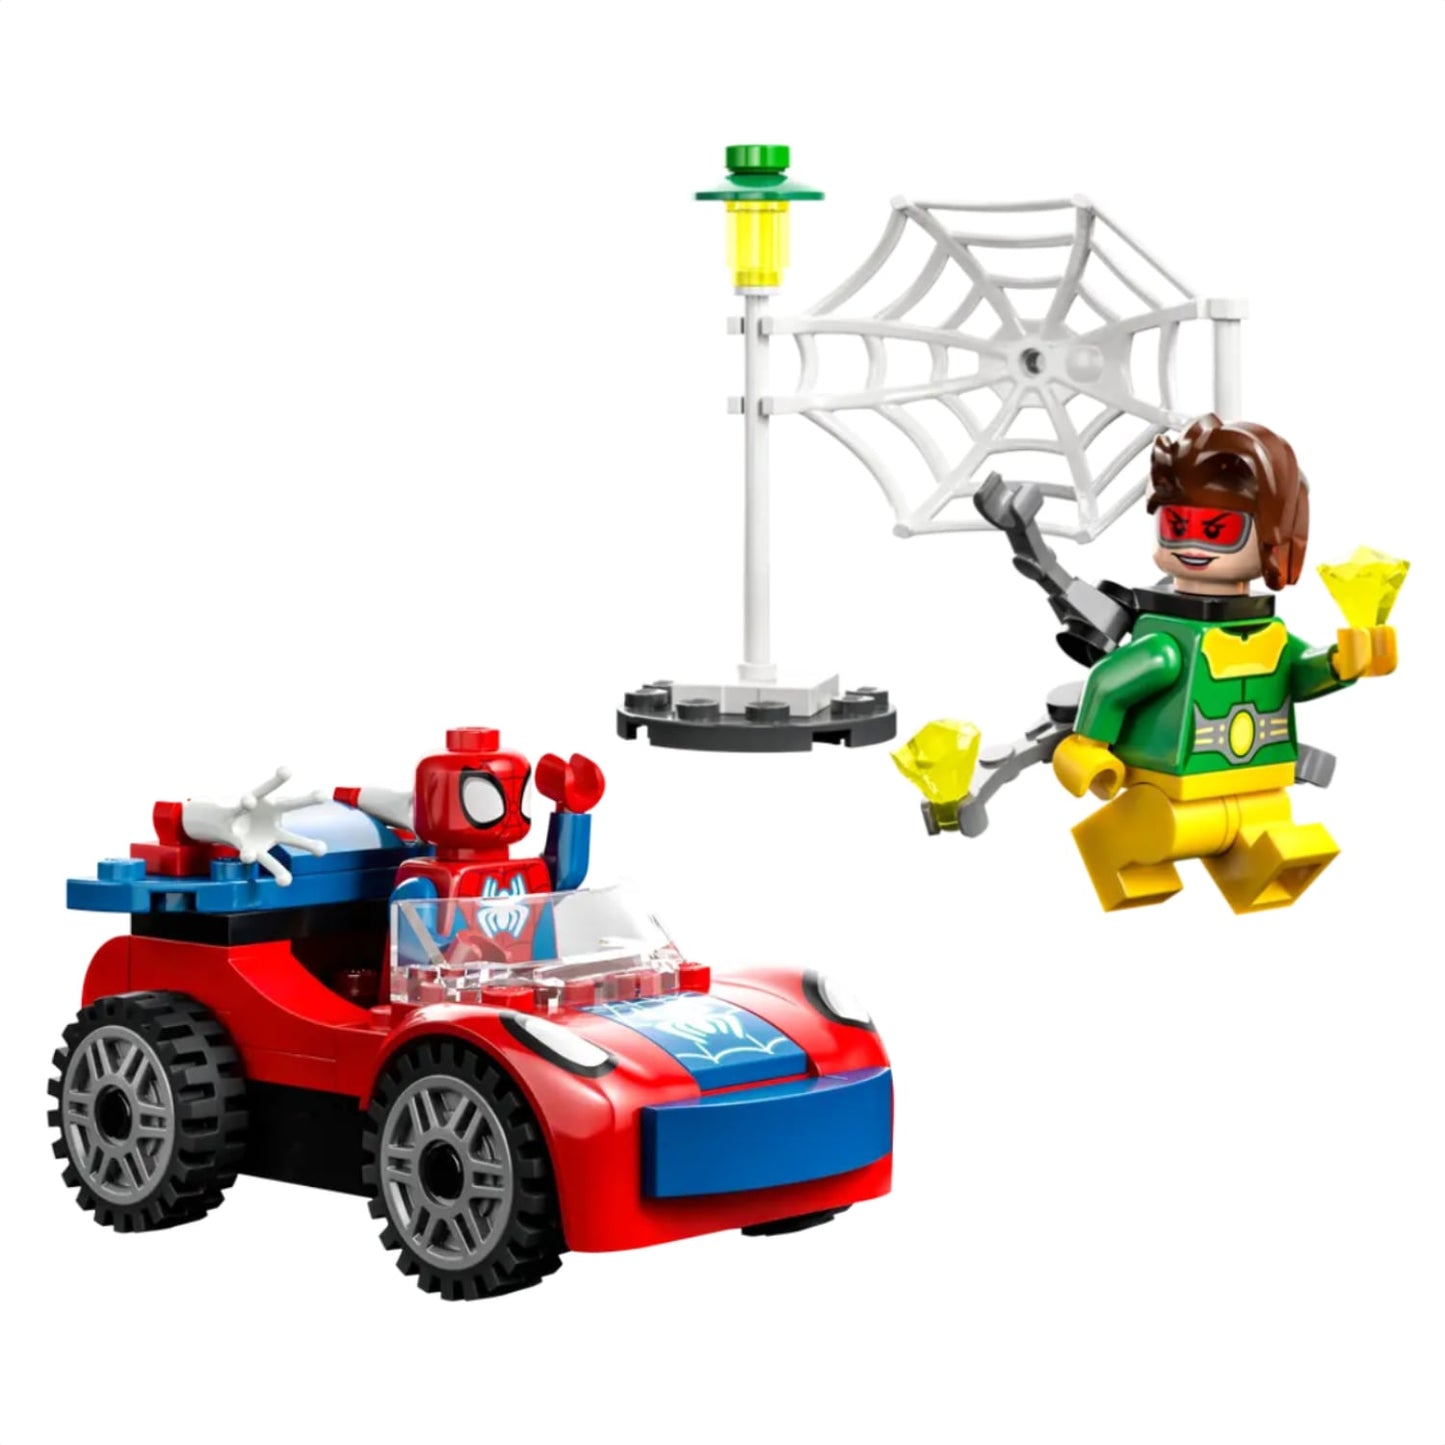 Lego 10789 Spider-Man's Car and Doc Ock